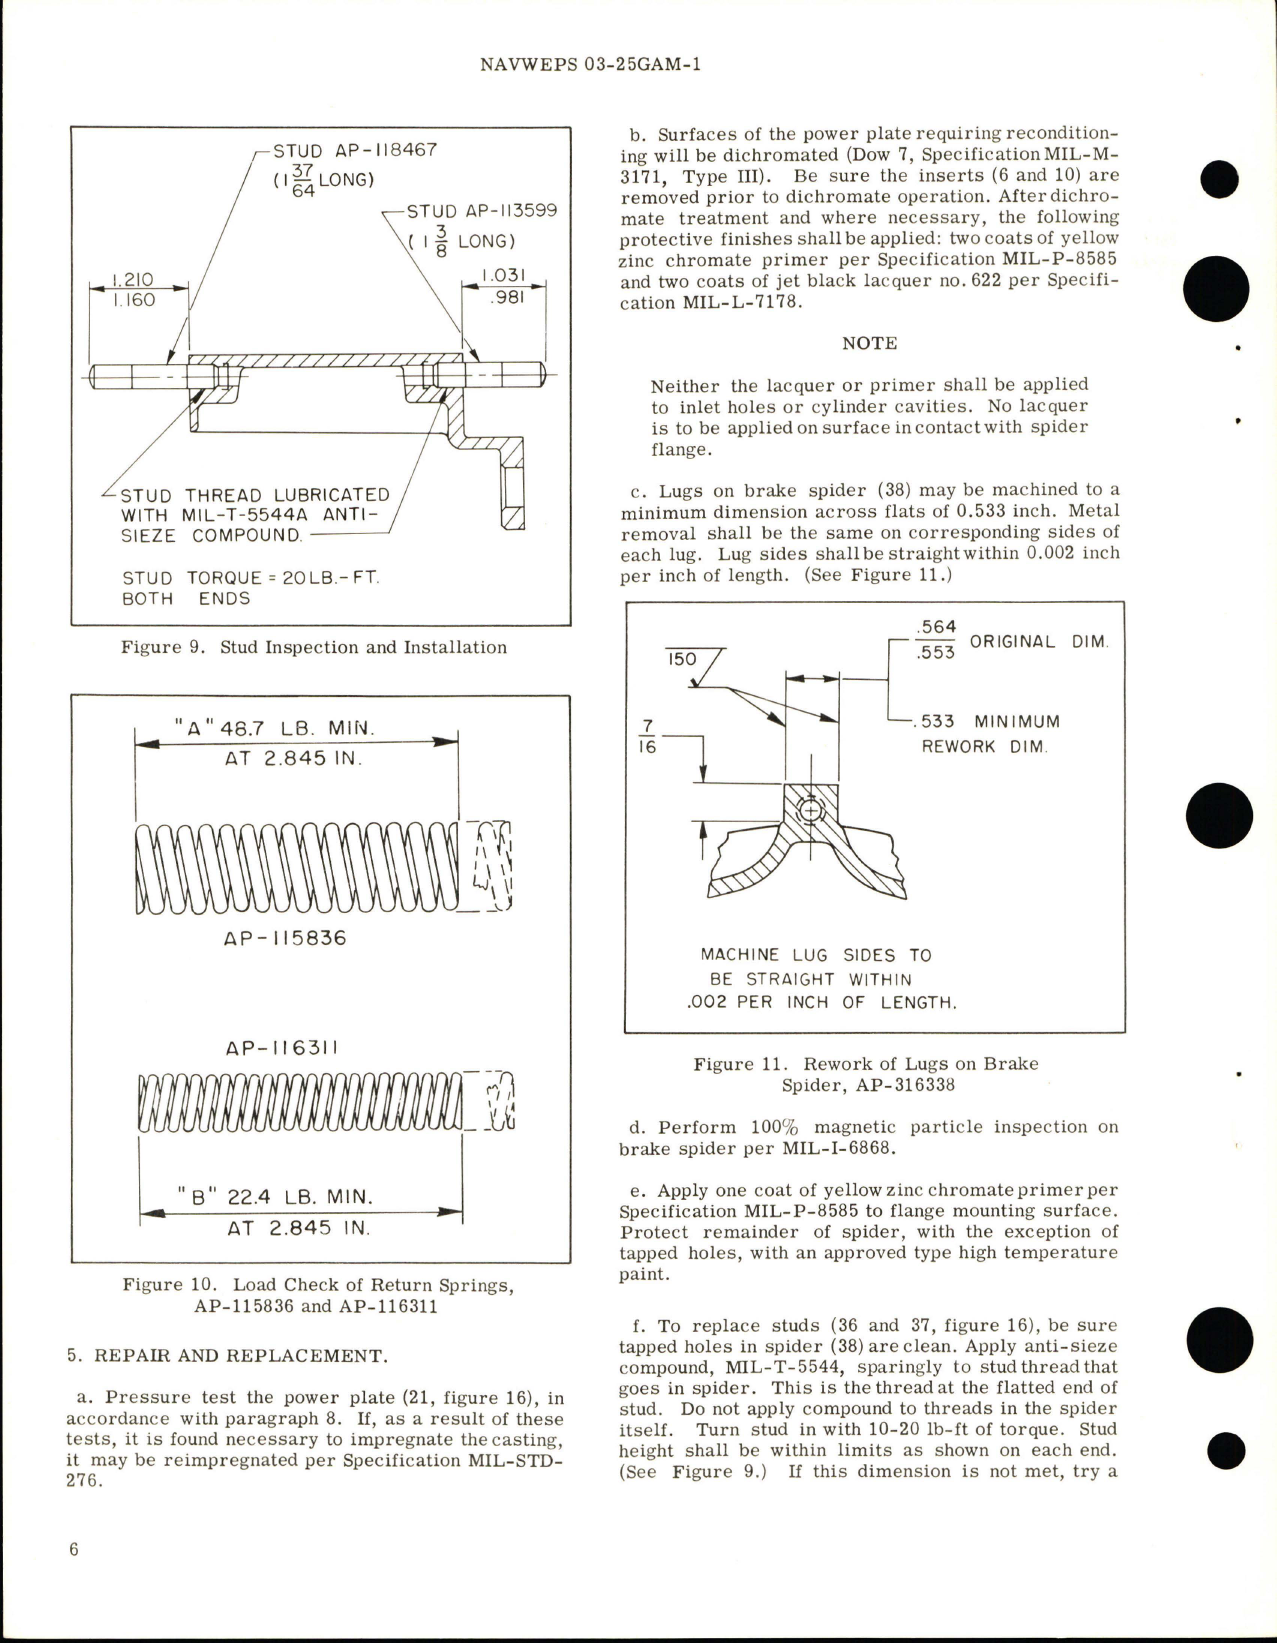 Sample page 6 from AirCorps Library document: Overhaul and Maintenance Instructions with Parts Breakdown for 5-Rotor Brake Assembly - 13 7/8 x 9 1/8 - Part AA-313314-2